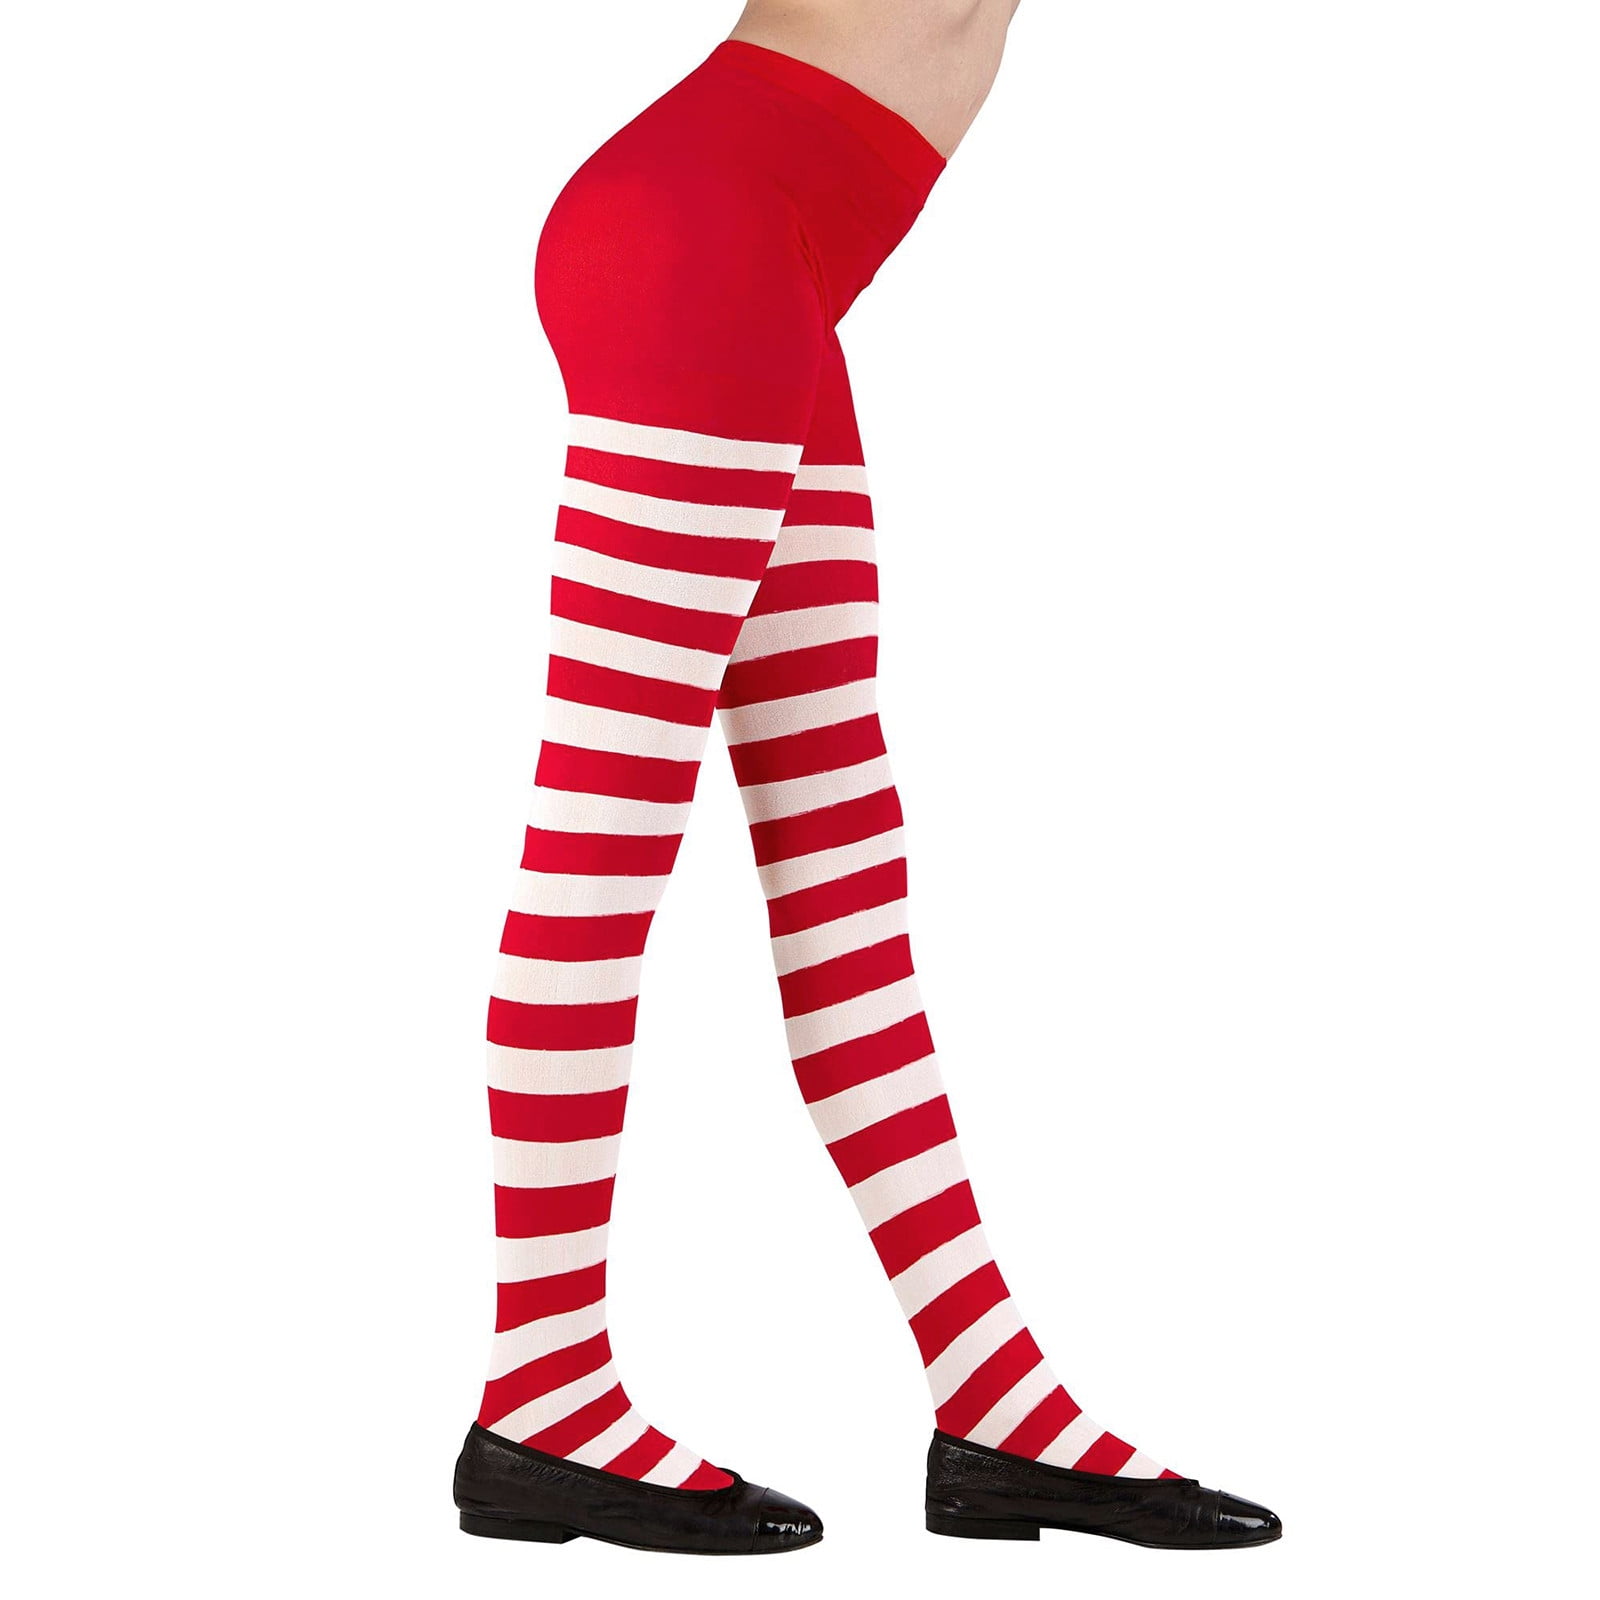 Pack of 3 Red Plain Tights for Girls/Women - Three Red Leggings/Tights